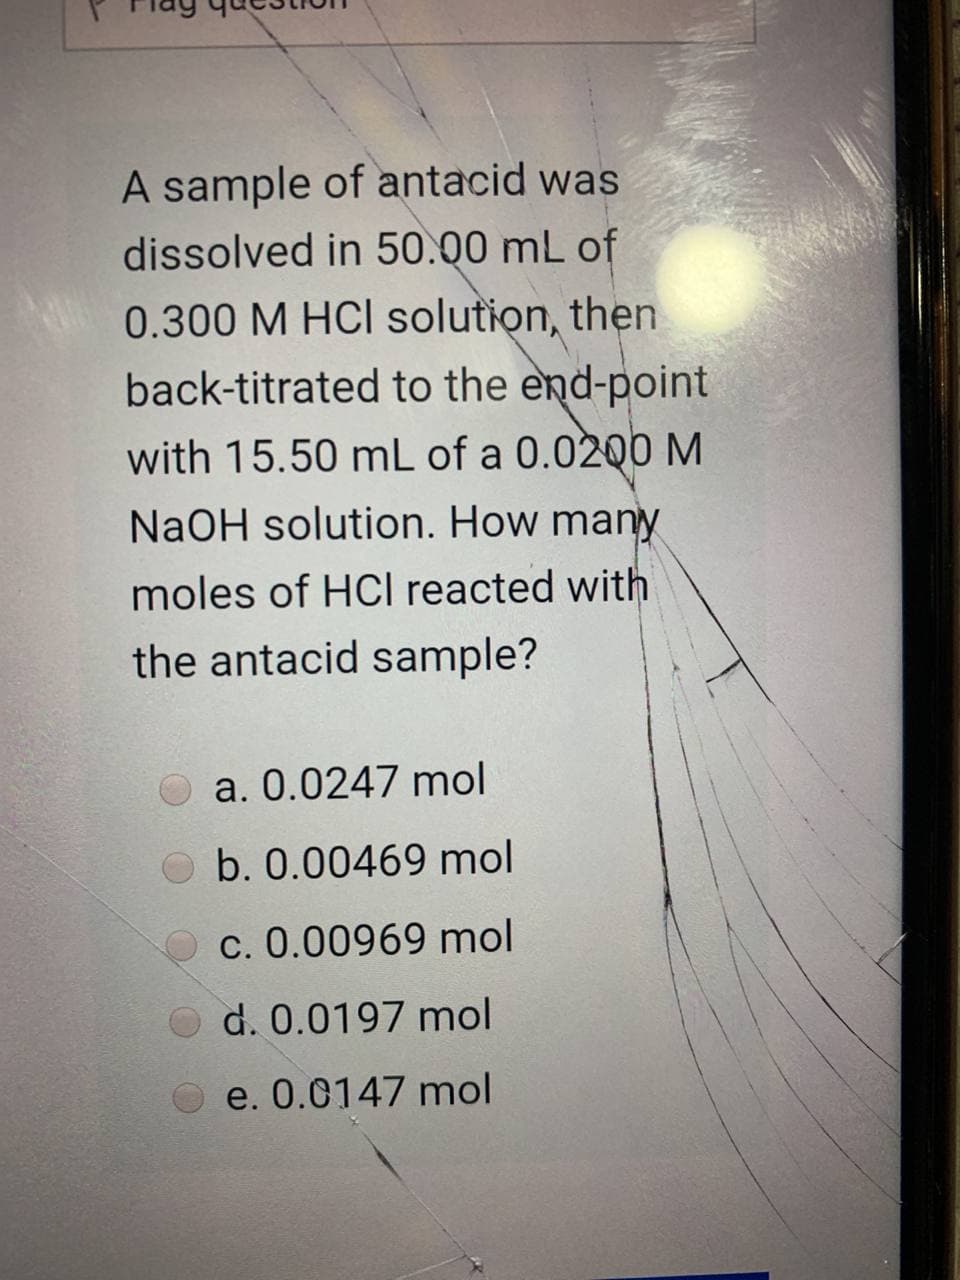 A sample of antacid was
dissolved in 50.00 mL of
0.300 M HCI solution, then
back-titrated to the end-point
with 15.50 mL of a 0.0200 M
NaOH solution. How many
moles of HCI reacted with
the antacid sample?
O a. 0.0247 mol
b. 0.00469 mol
c. 0.00969 mol
O d. 0.0197 mol
e. 0.0147 mol
